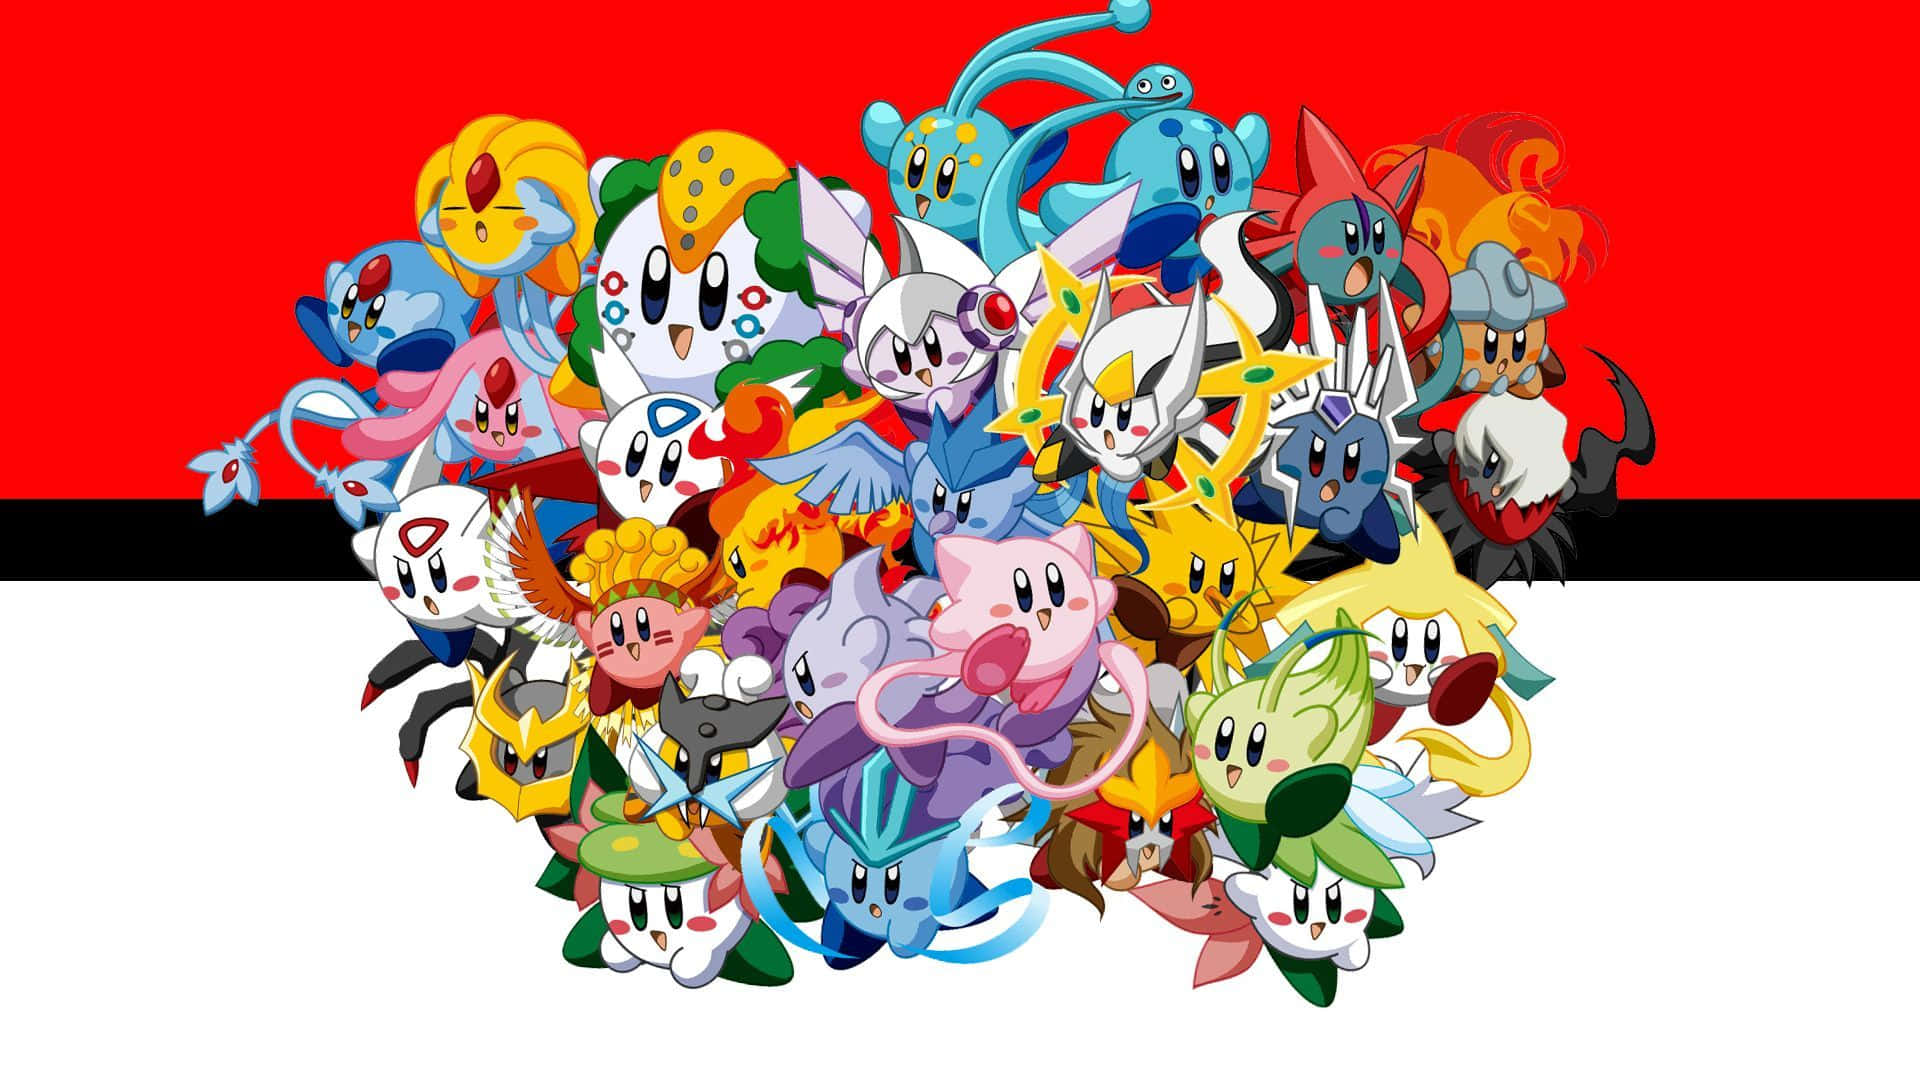 Pokemon Characters In A Red And White Background